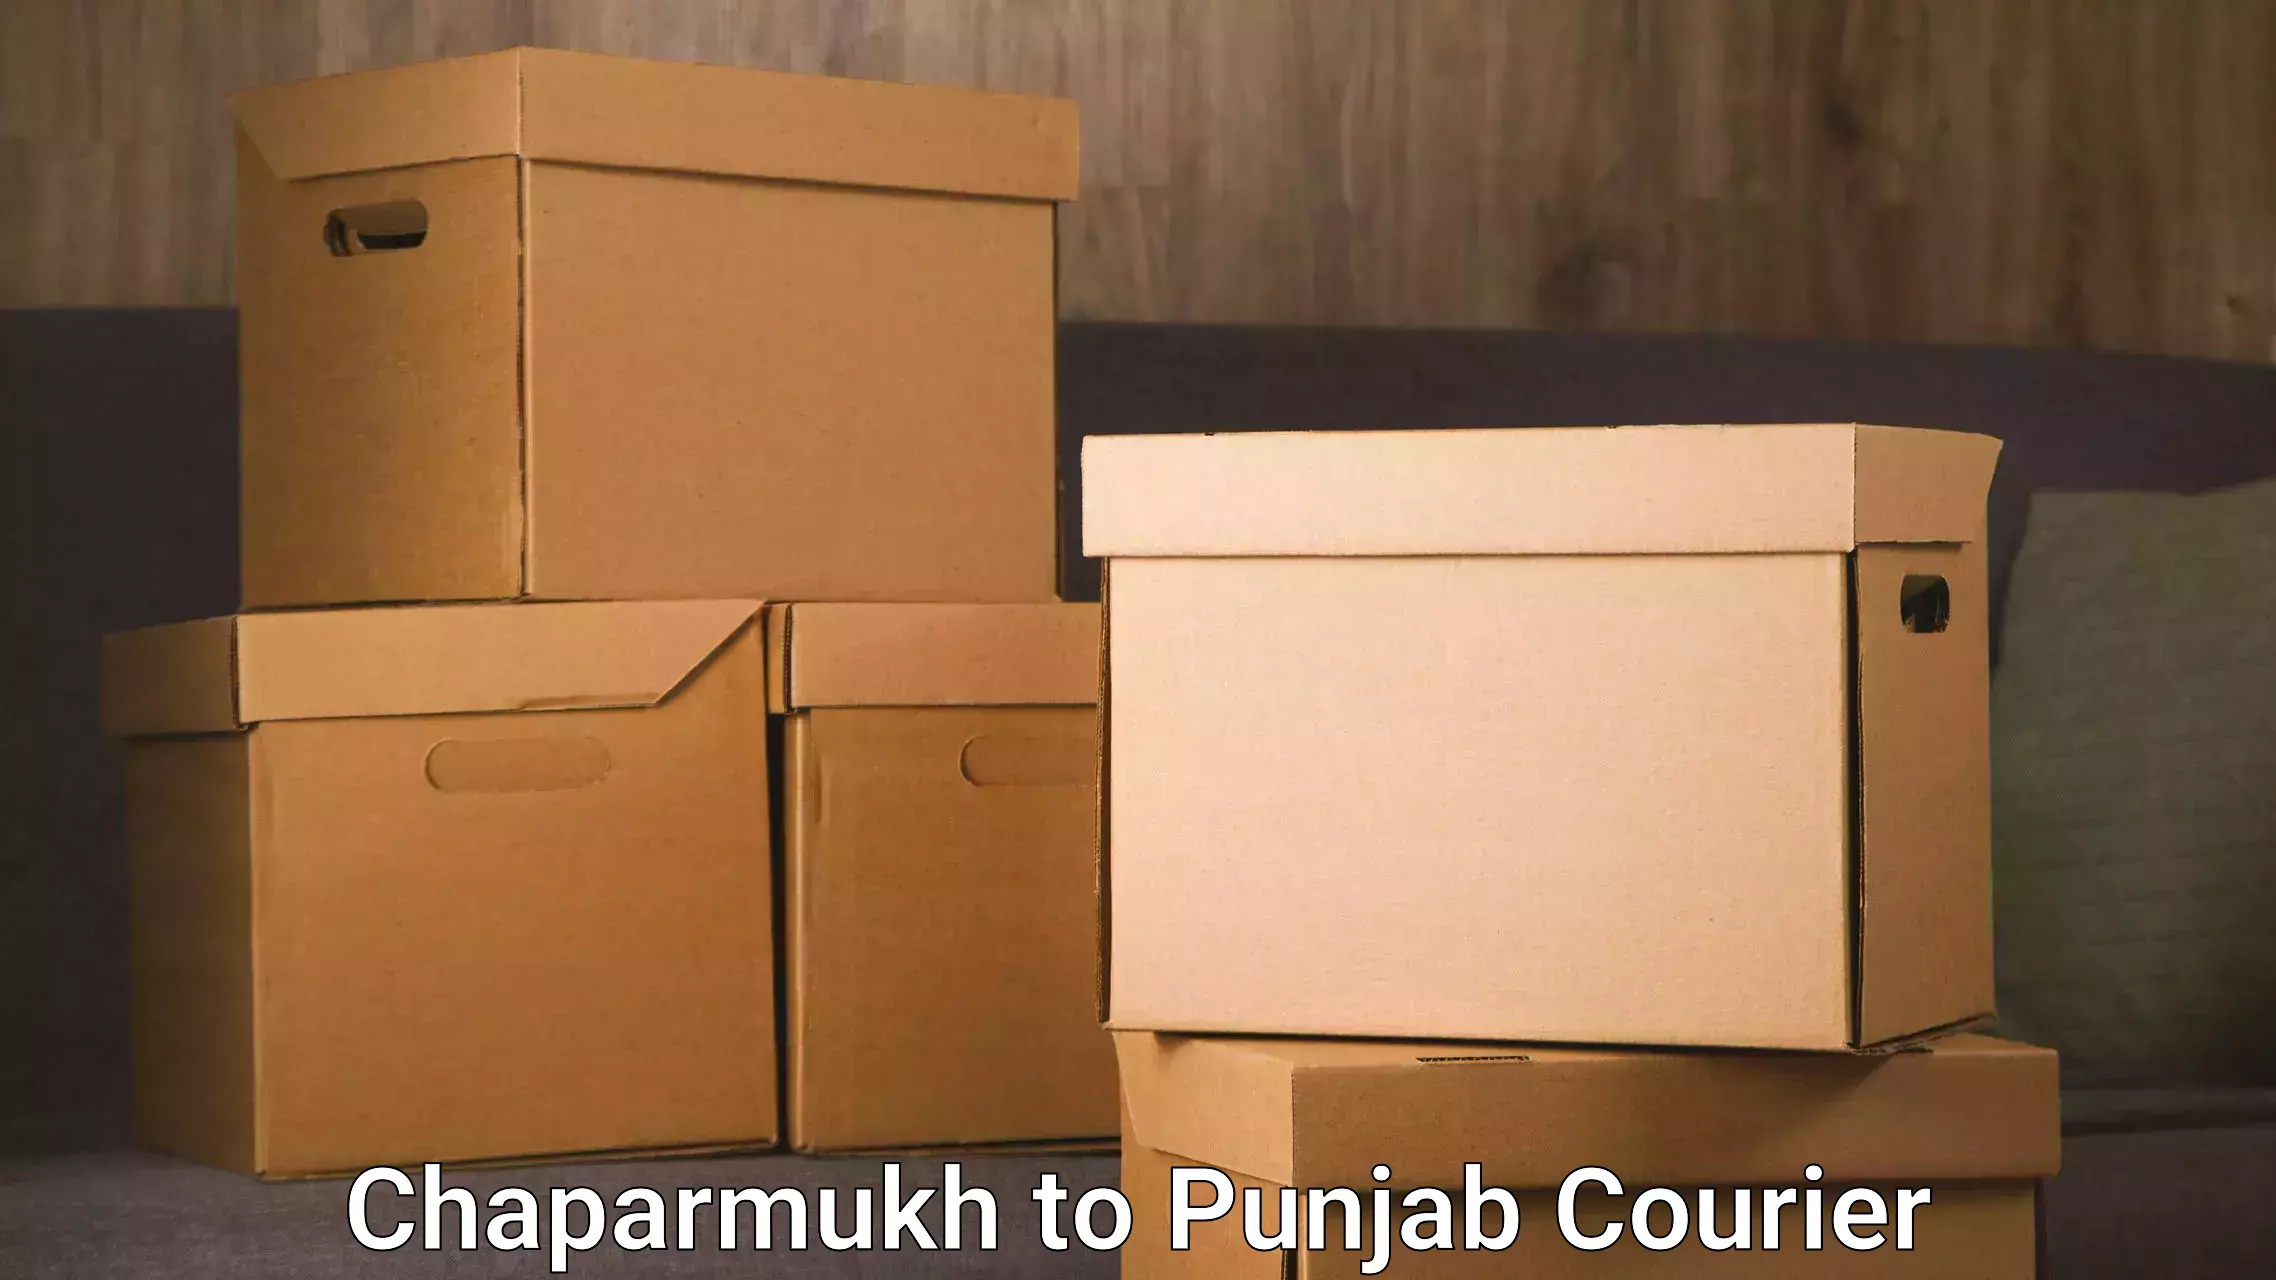 24-hour courier service Chaparmukh to Firozpur